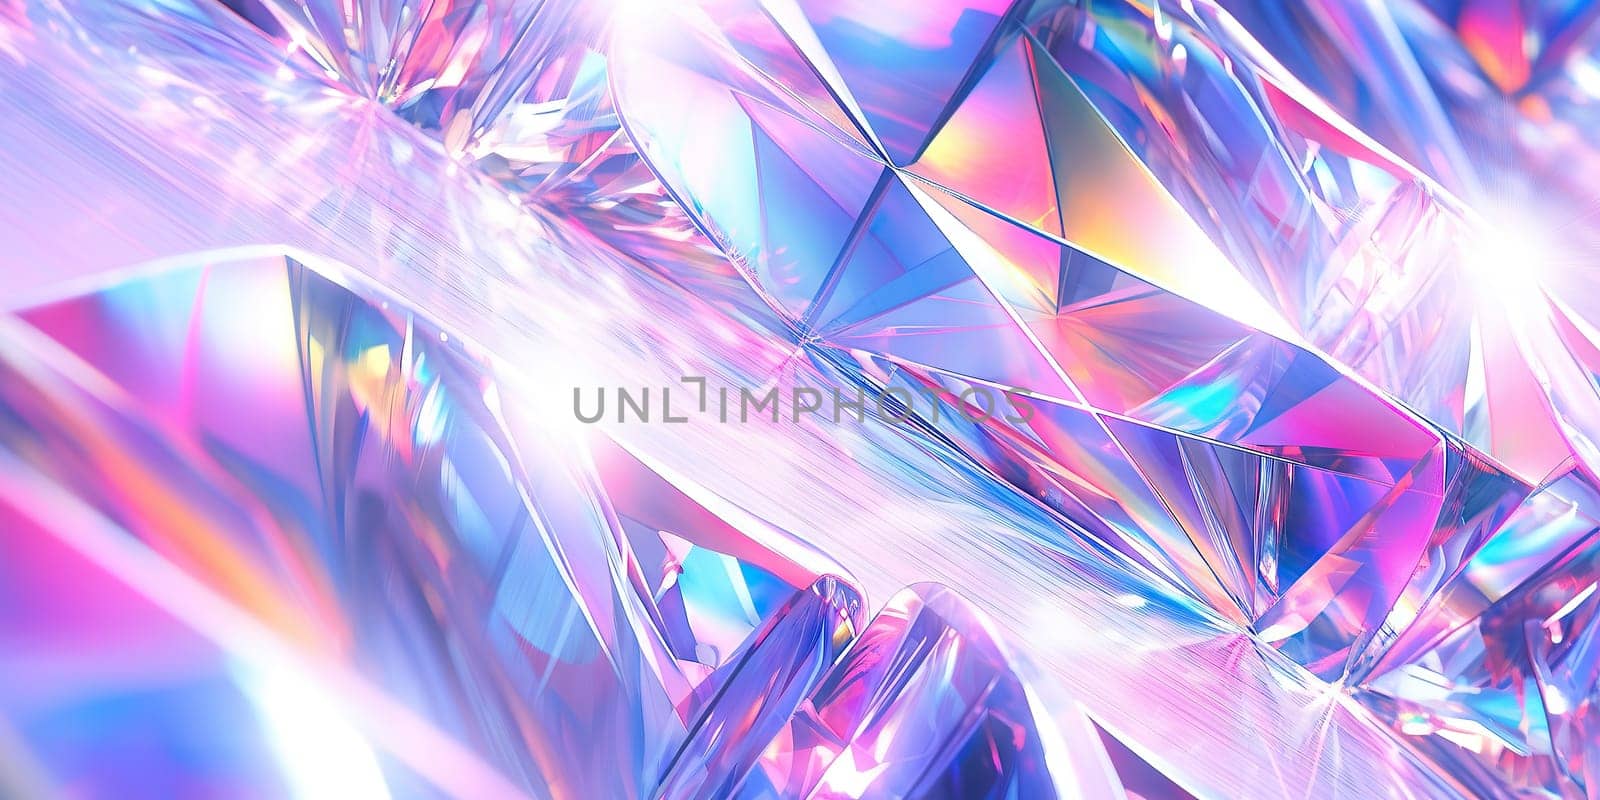 Holographic background with glass shards. Rainbow reflexes in pink and purple color. Abstract trendy pattern. Texture with magical effect. by Artsiom